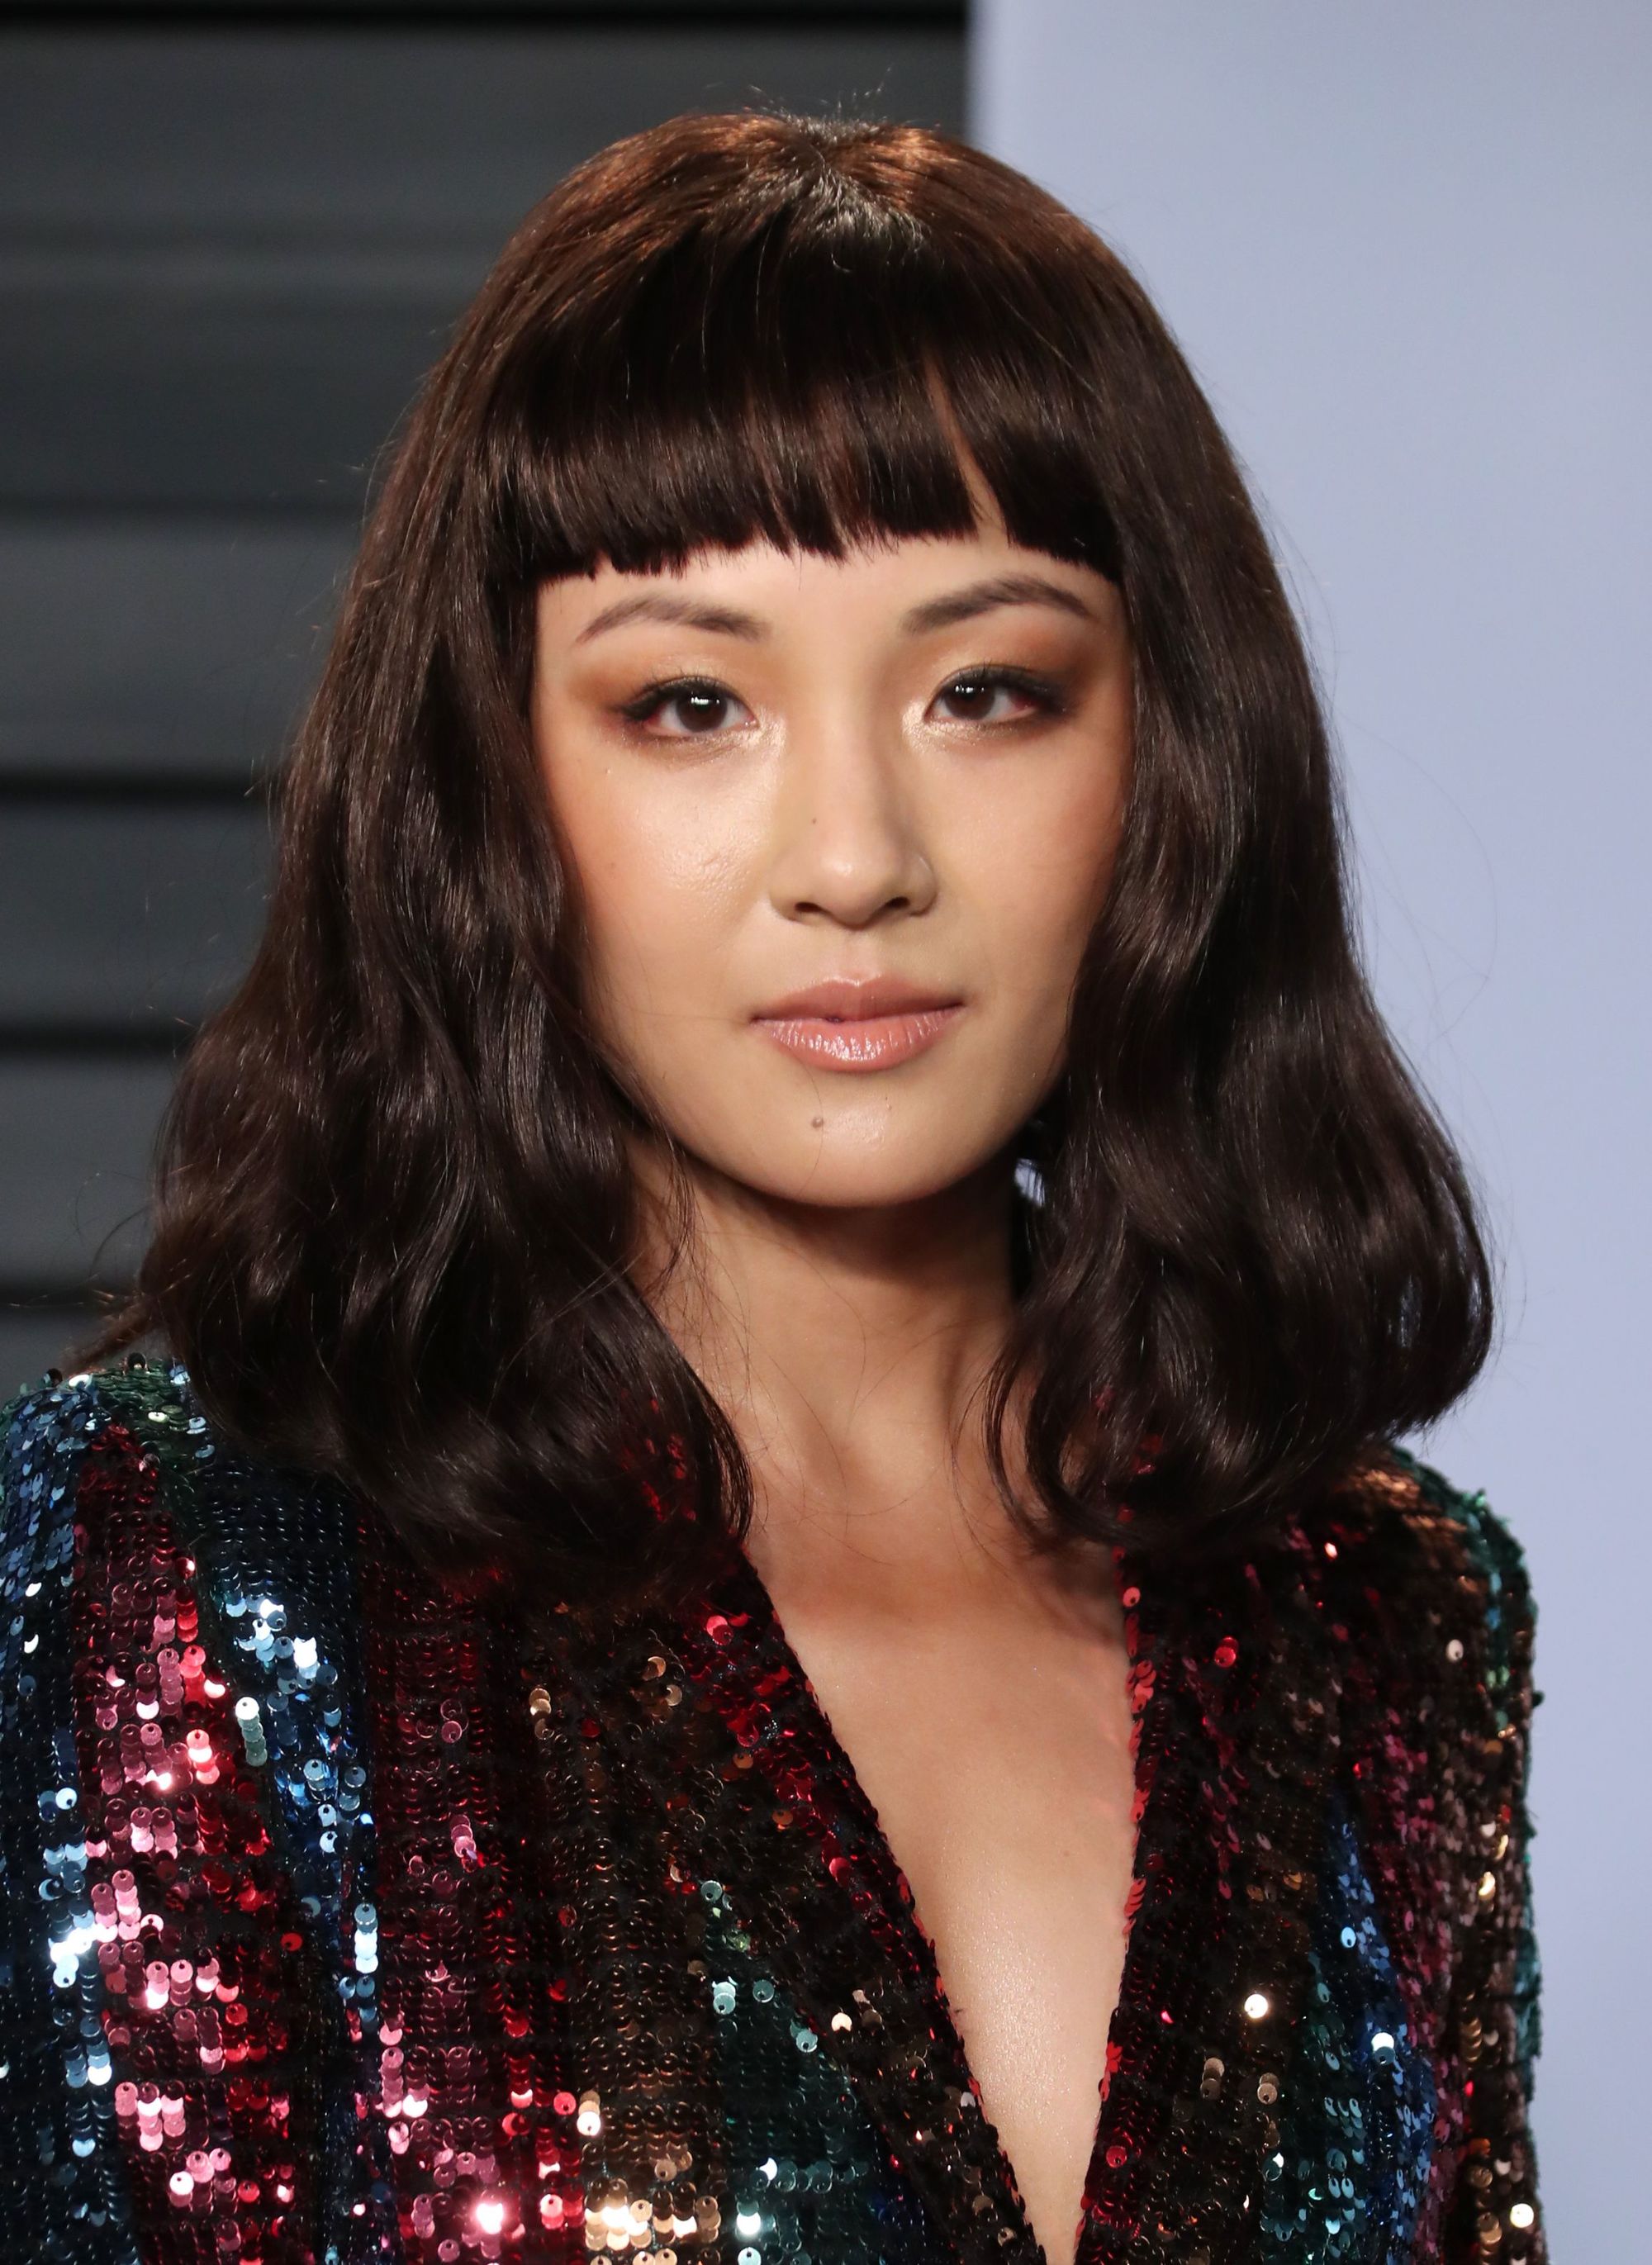 close up shot of constance wu on the red carpet with blunt cut bangs, wearing glittery dress on the oscars red carpet